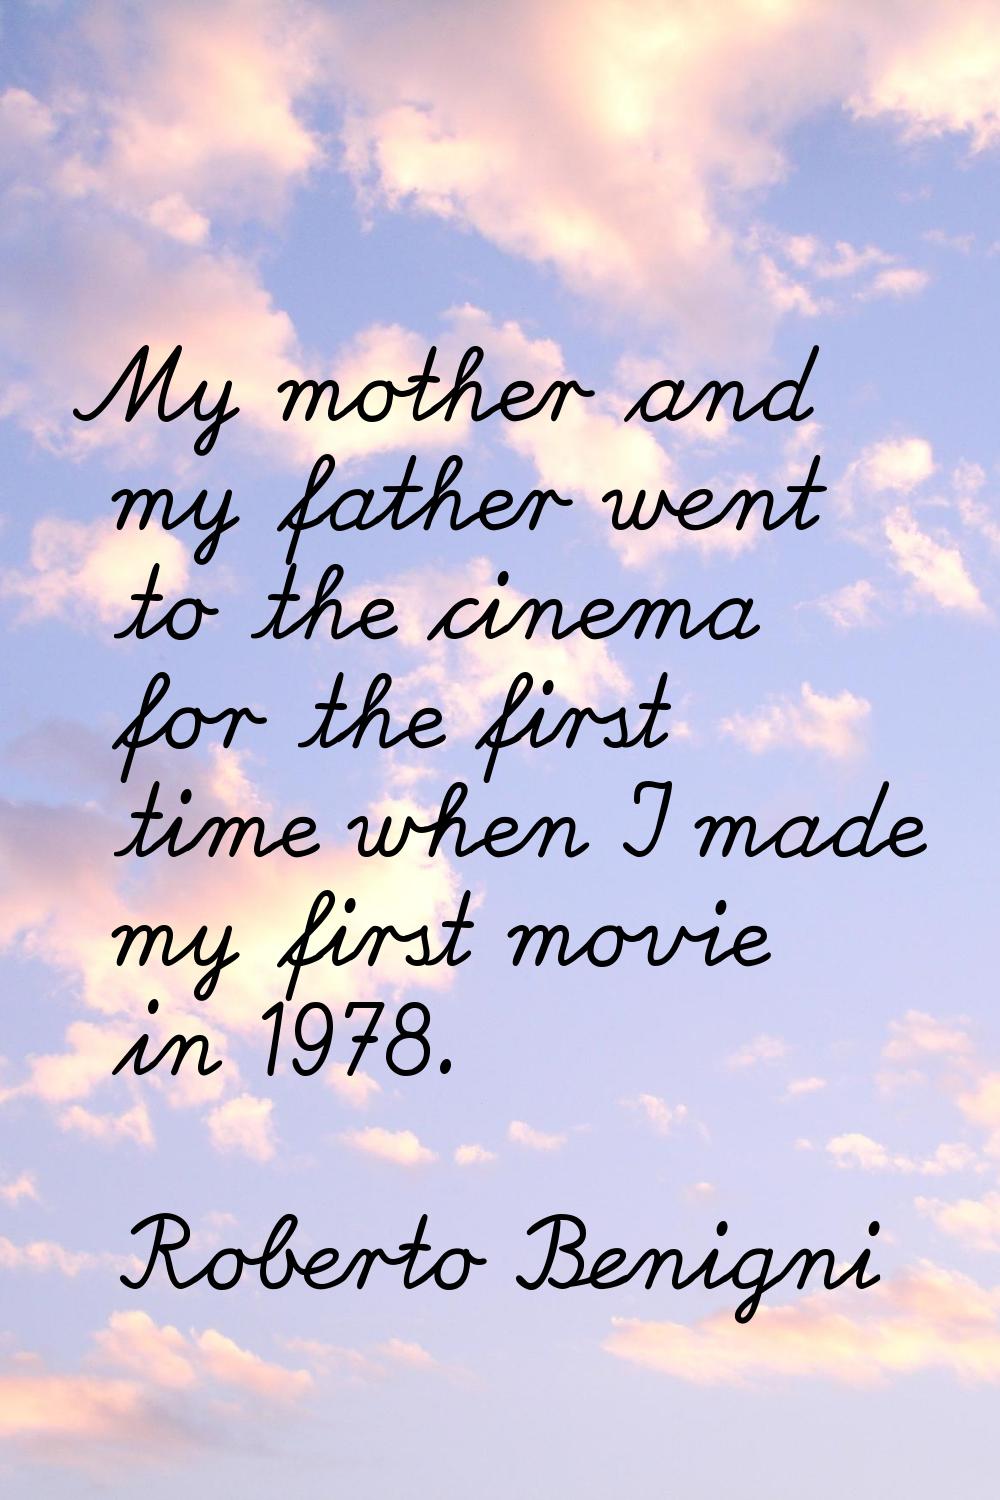 My mother and my father went to the cinema for the first time when I made my first movie in 1978.